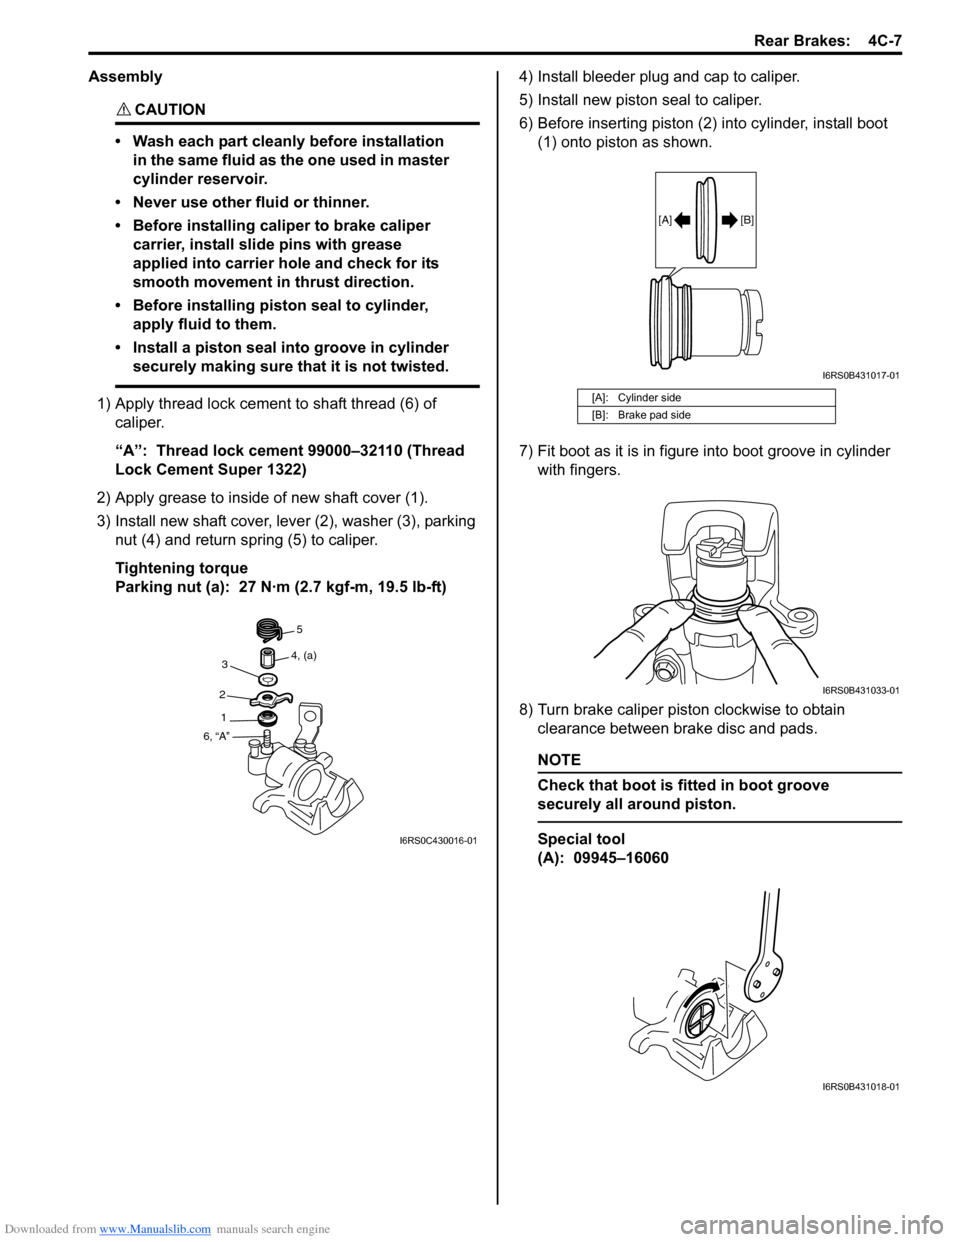 SUZUKI SWIFT 2008 2.G Service User Guide Downloaded from www.Manualslib.com manuals search engine Rear Brakes:  4C-7
Assembly
CAUTION! 
• Wash each part cleanly before installation in the same fluid as the one used in master 
cylinder rese